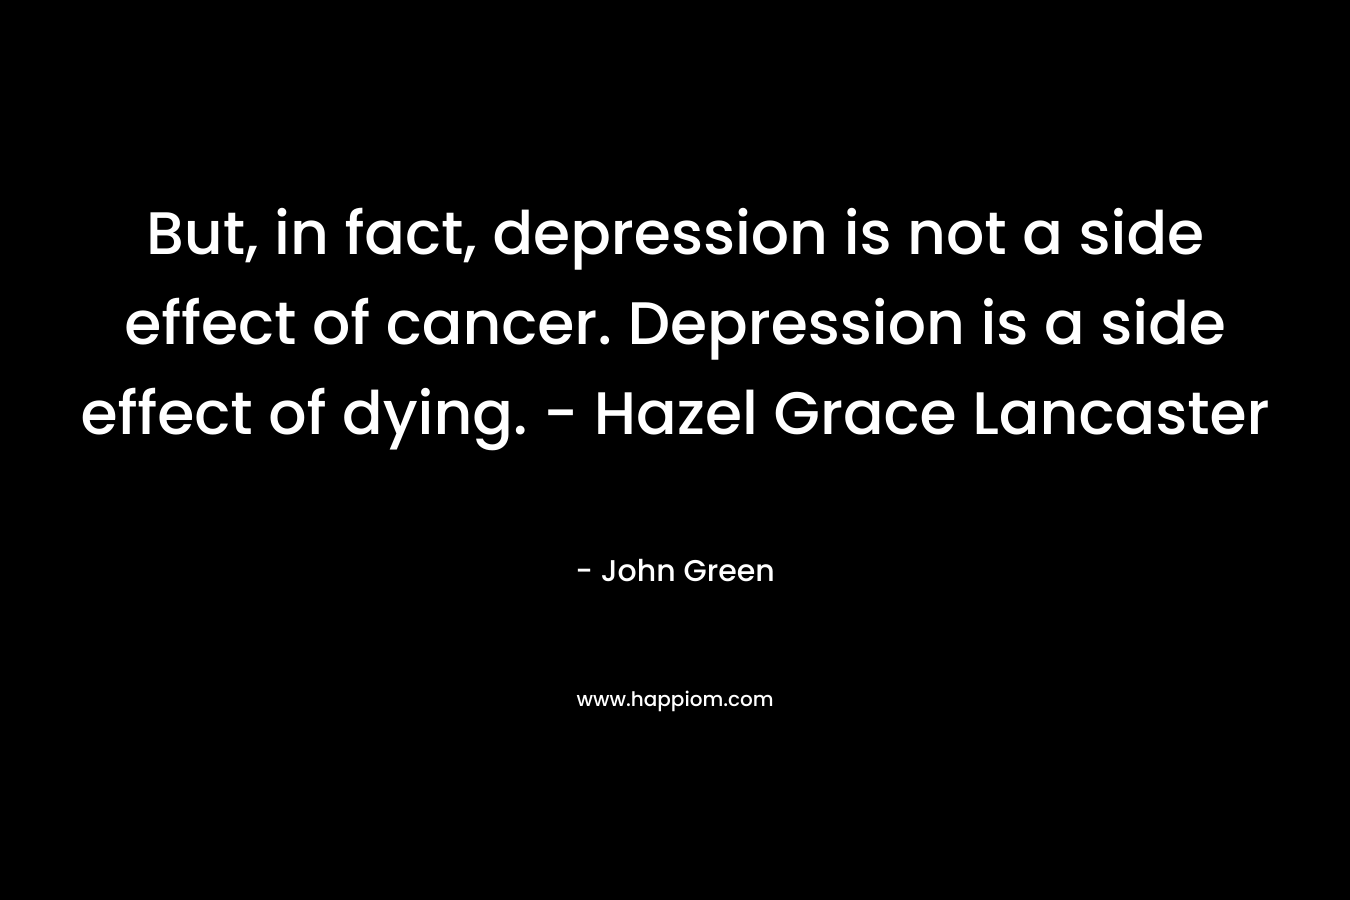 But, in fact, depression is not a side effect of cancer. Depression is a side effect of dying. - Hazel Grace Lancaster